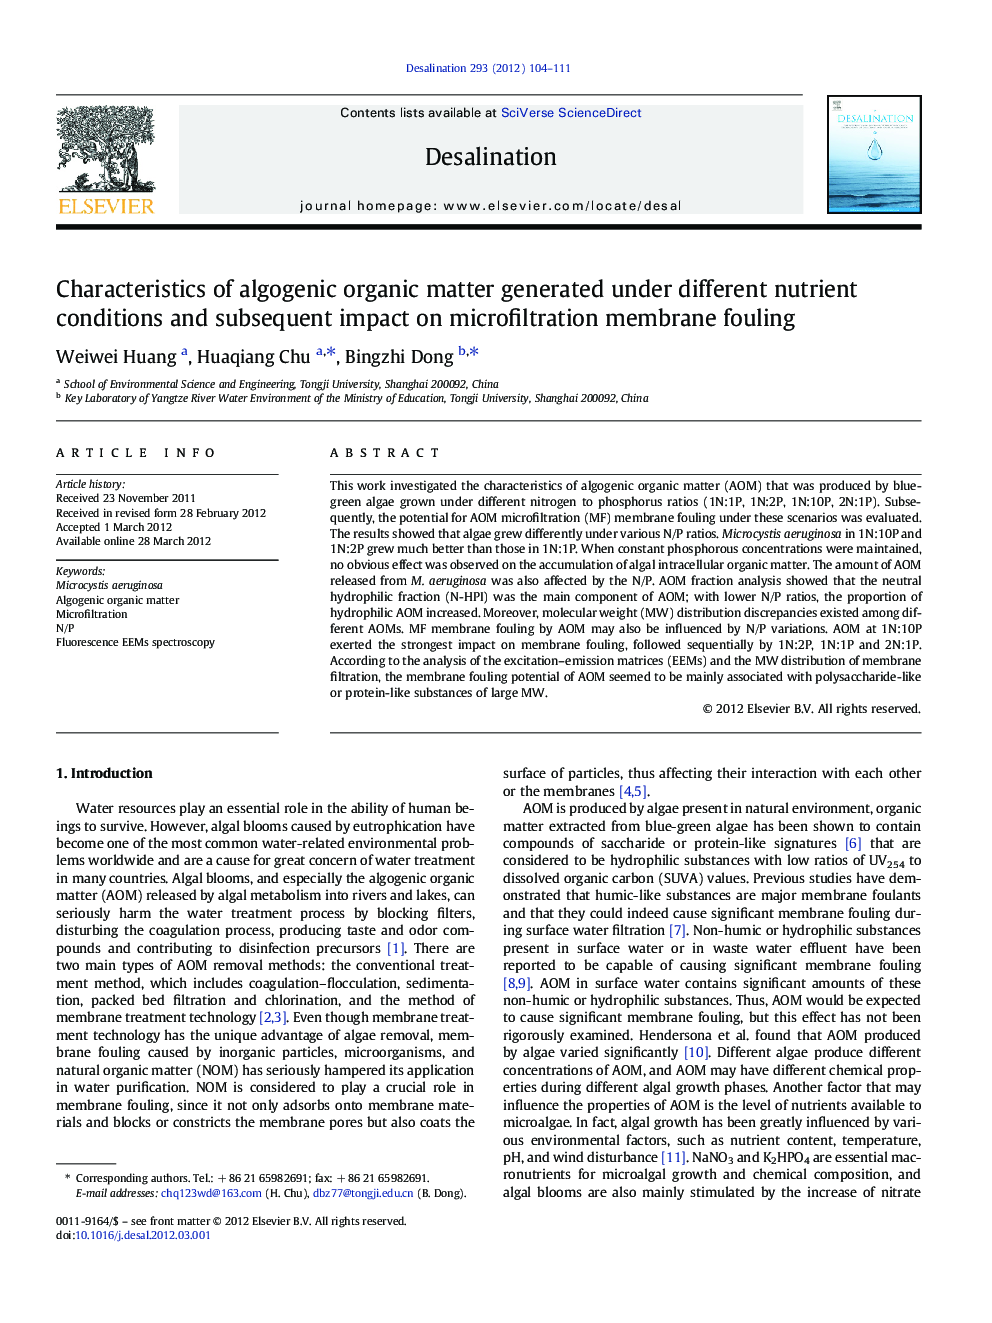 Characteristics of algogenic organic matter generated under different nutrient conditions and subsequent impact on microfiltration membrane fouling